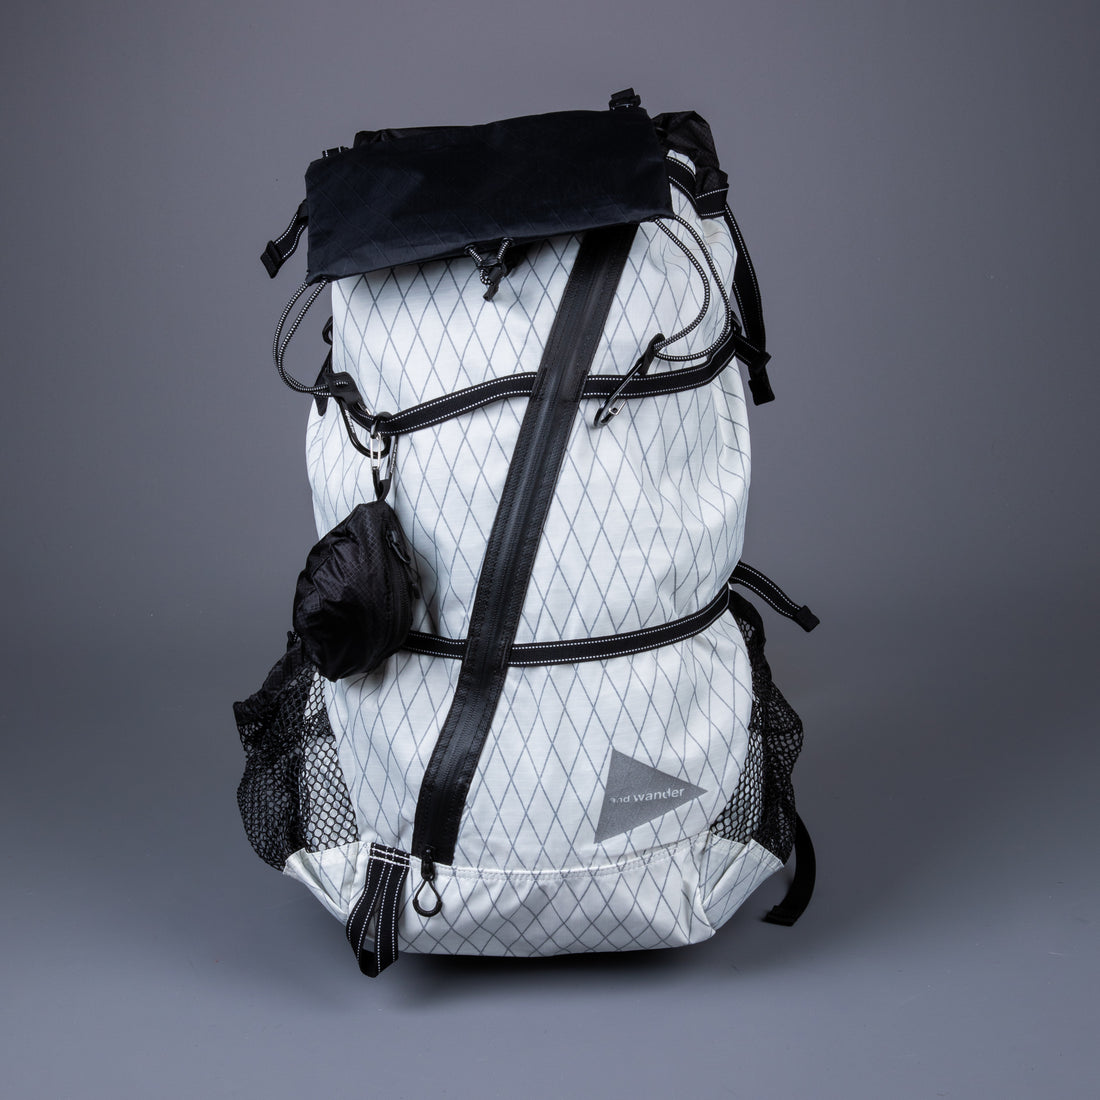 And Wander X-Pac 40L Backpack Off White – Frans Boone Store